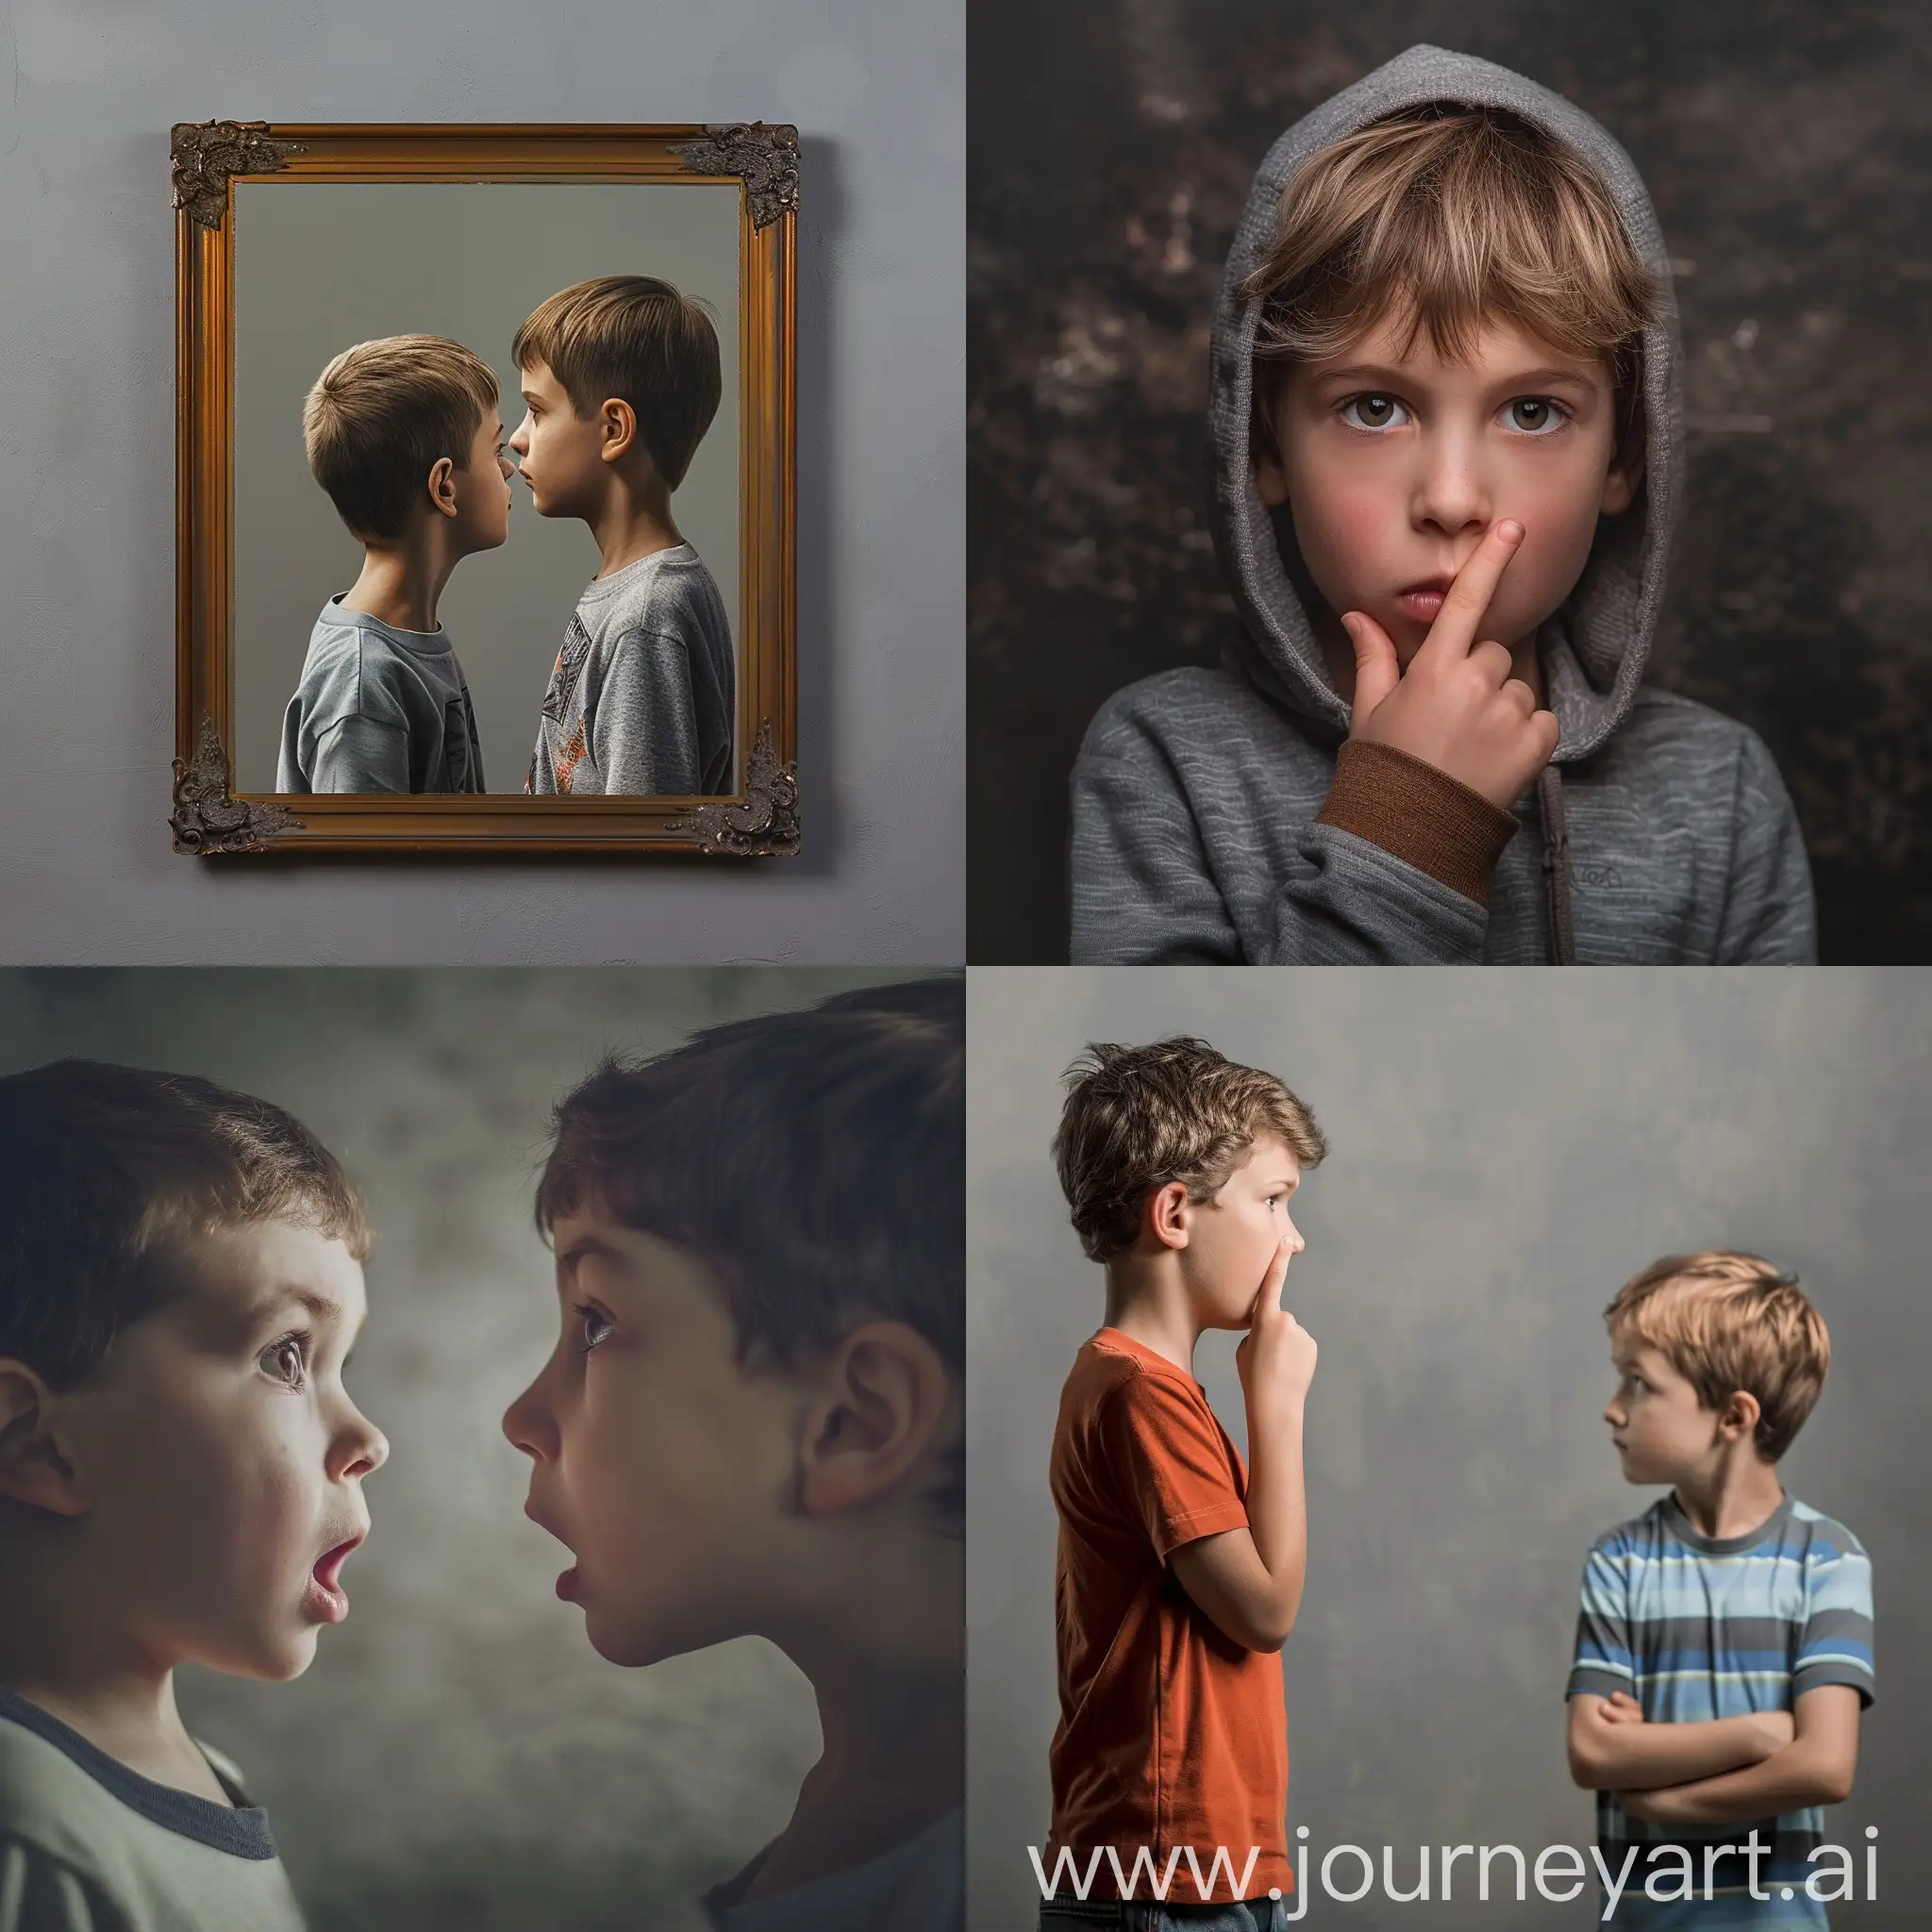 The kid Silence and low self-esteem turn into learning self-expression comparison